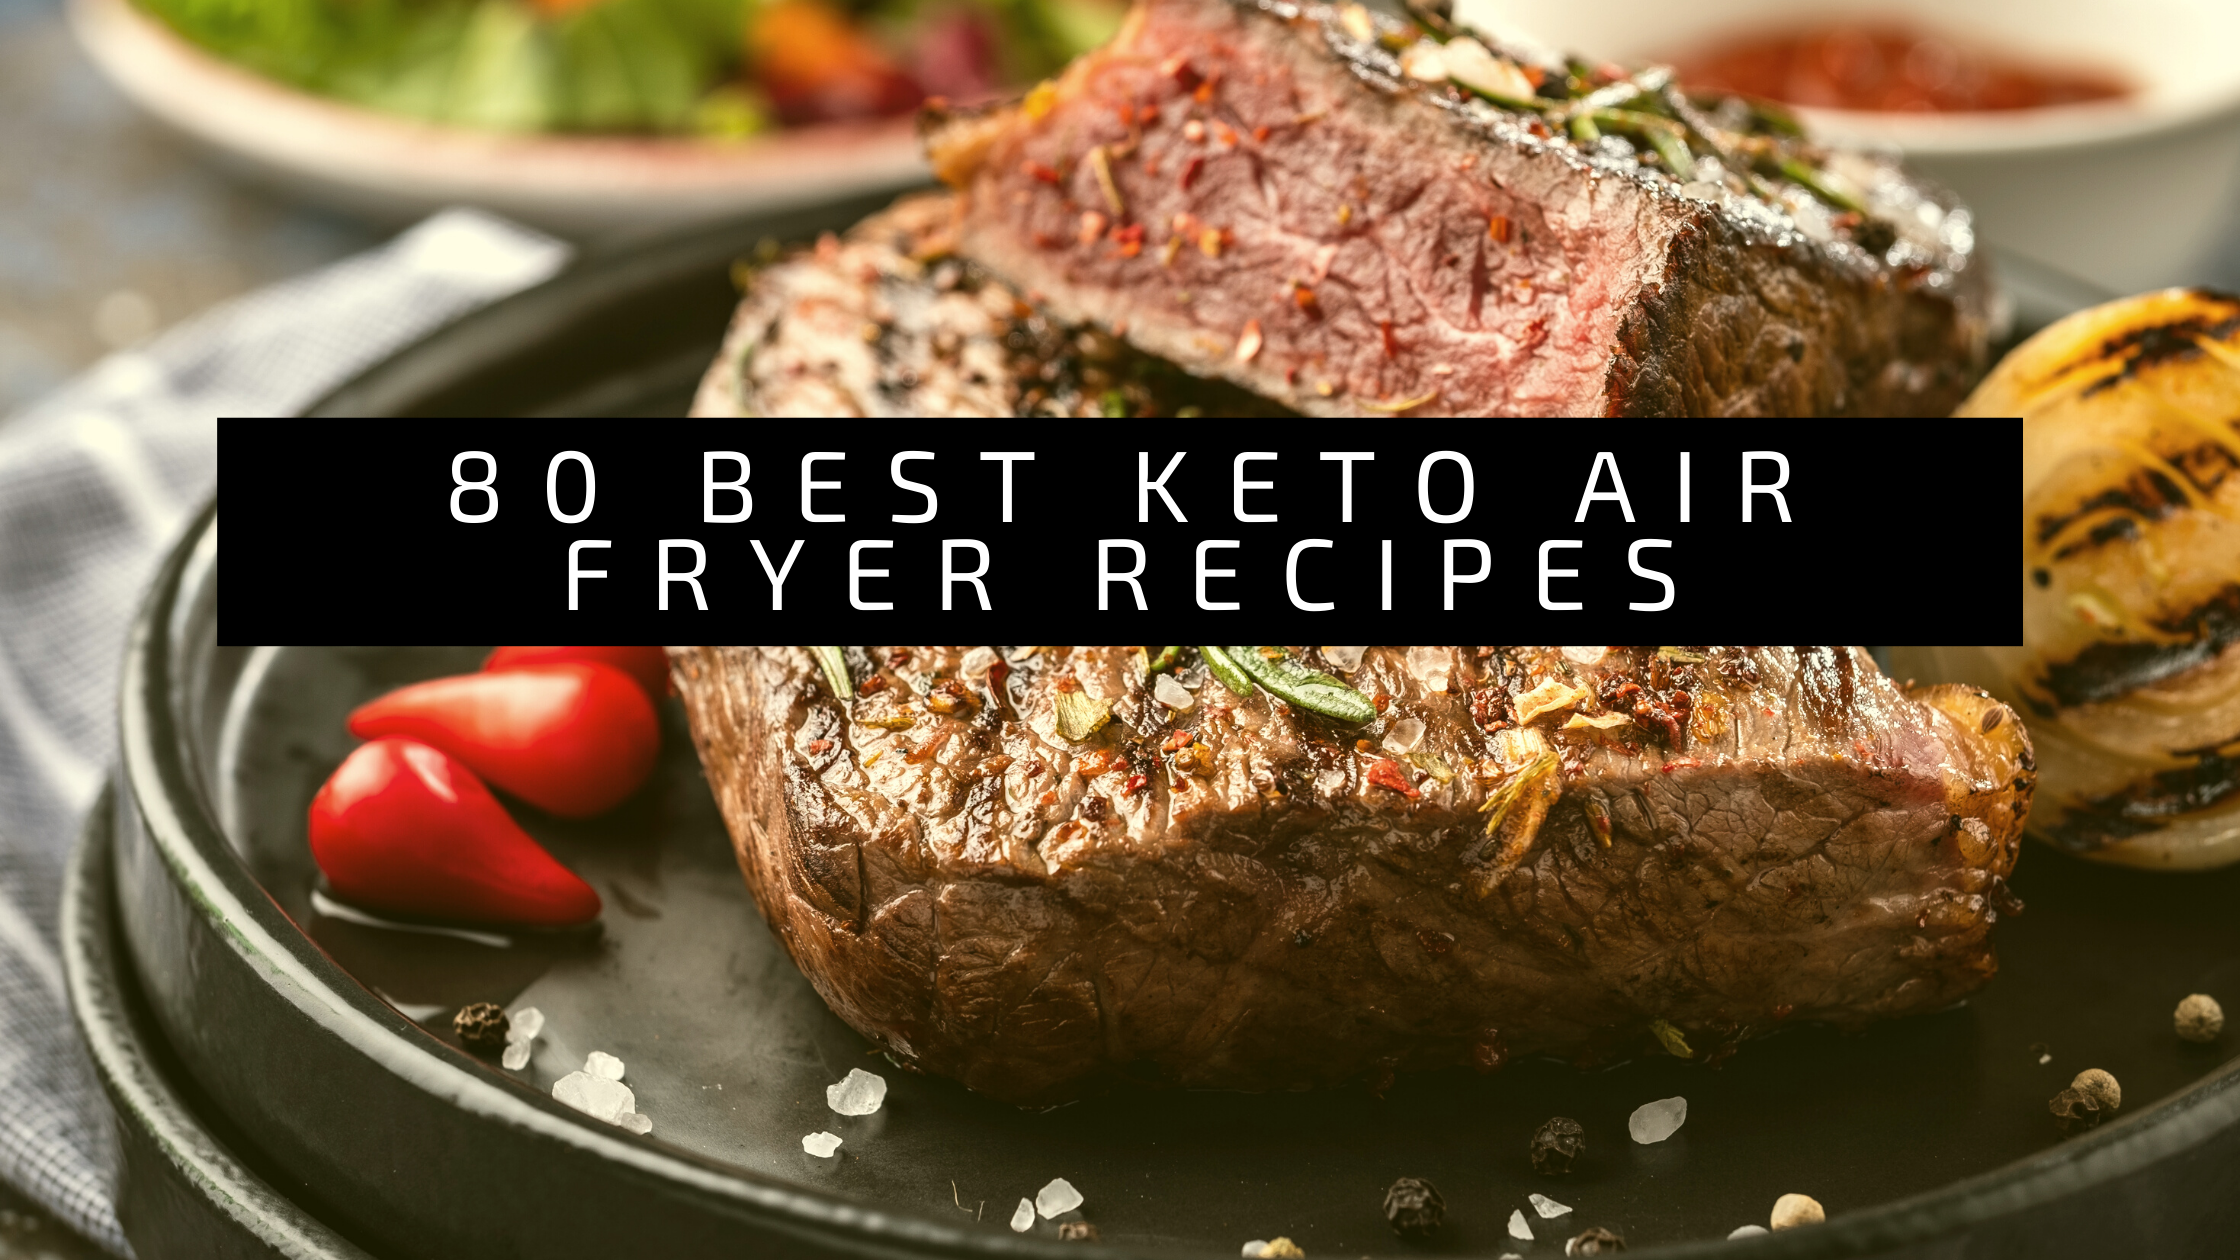 40 Family-Friendly Keto Air Fryer Recipes for Quick and Delicious Meals 12